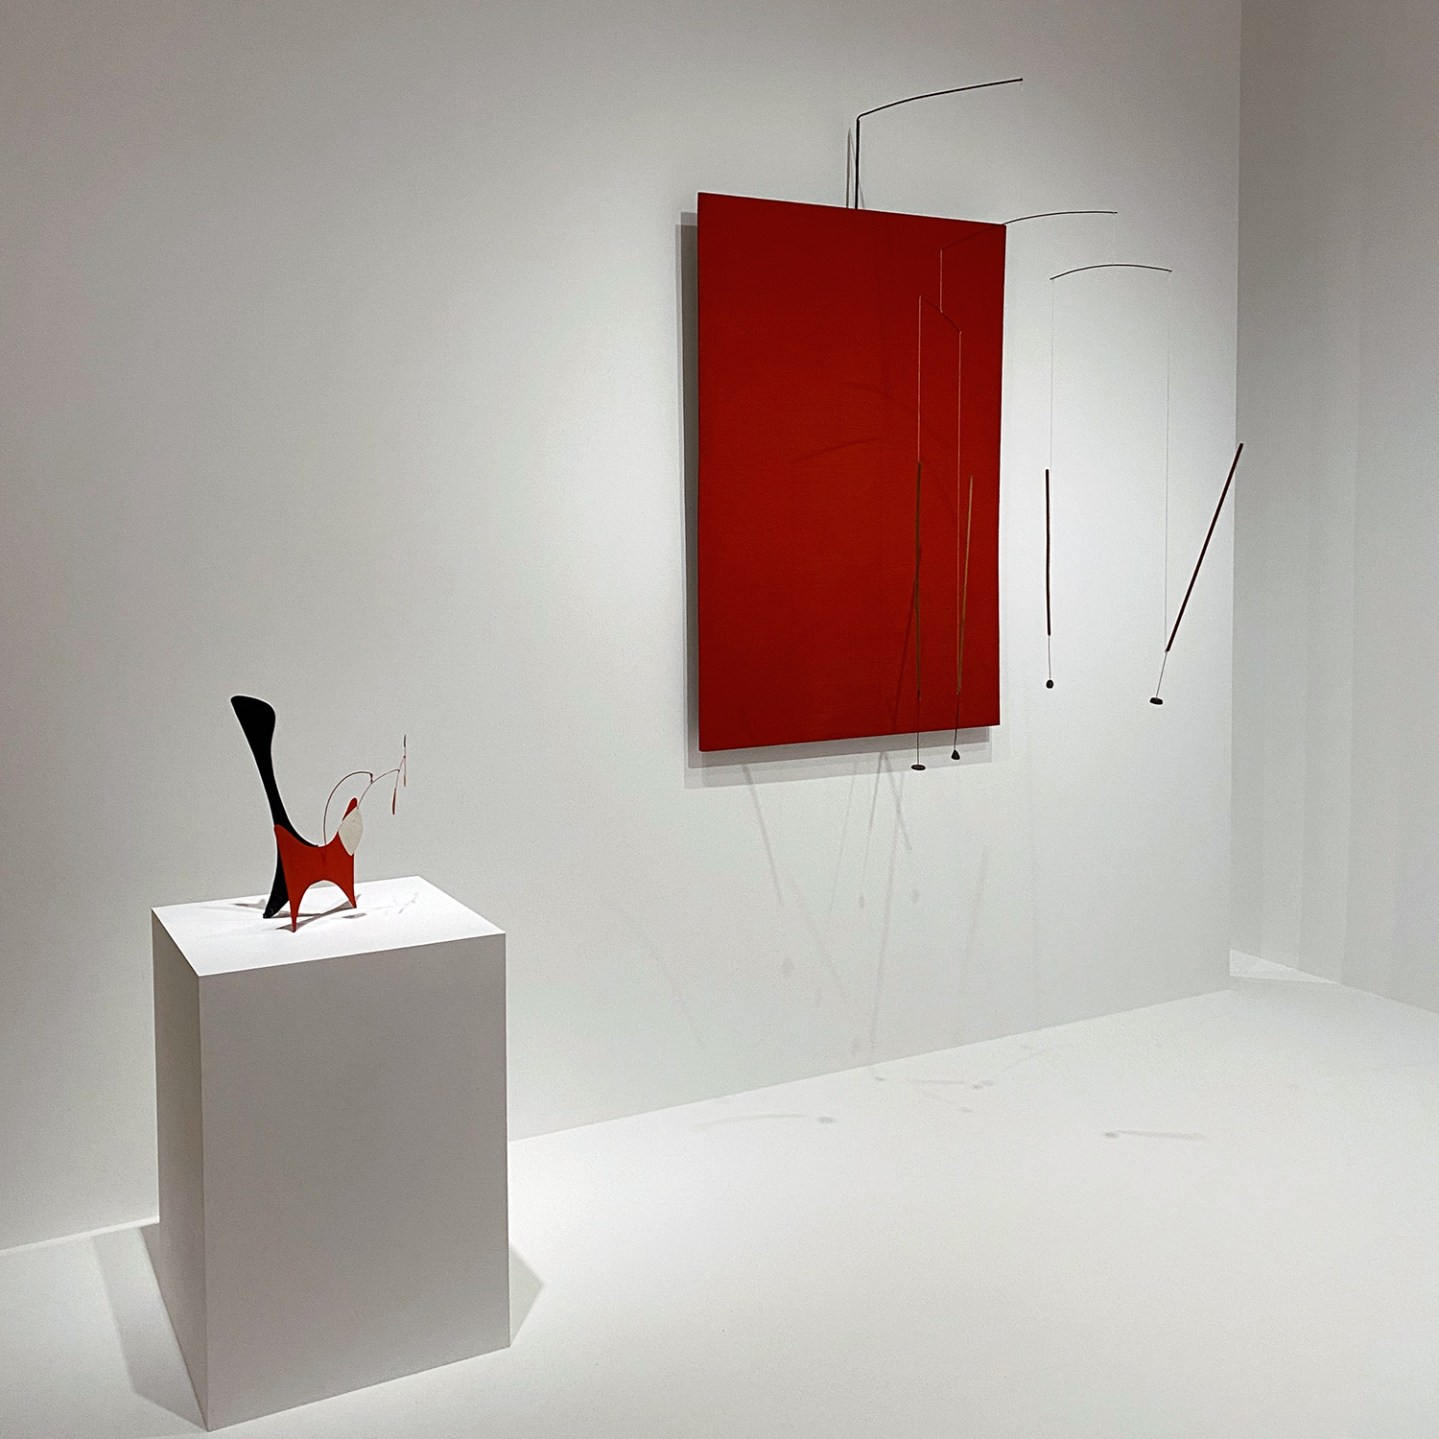 From Left: Untitled, 1939 and Swizzle Sticks, 1936